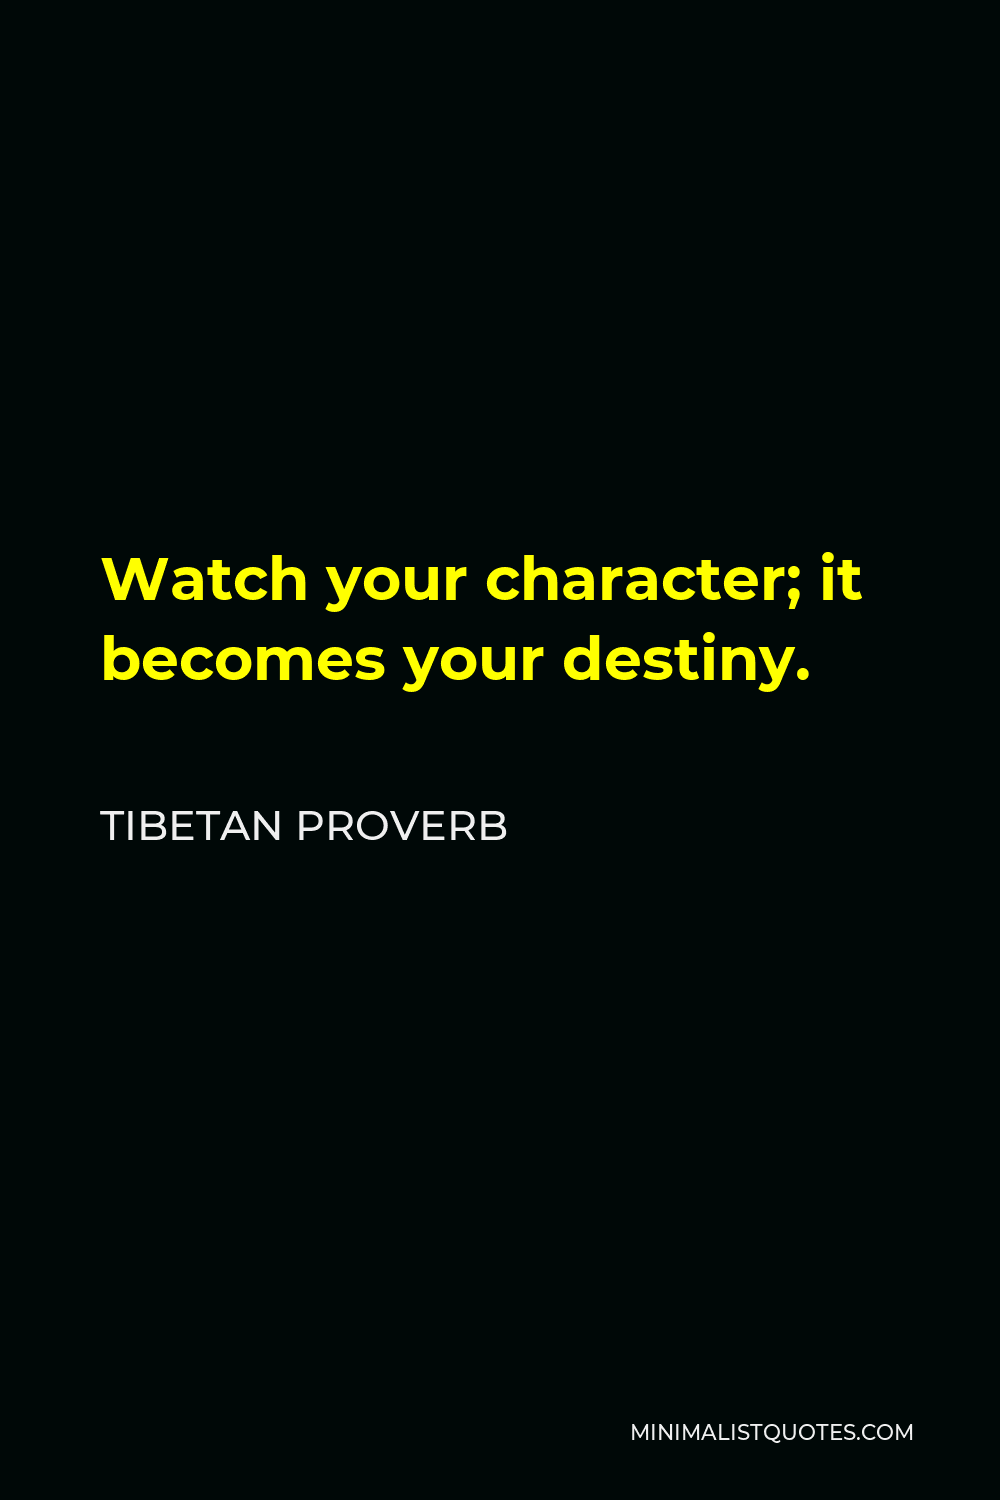 Tibetan Proverb Quote - Watch your character; it becomes your destiny.